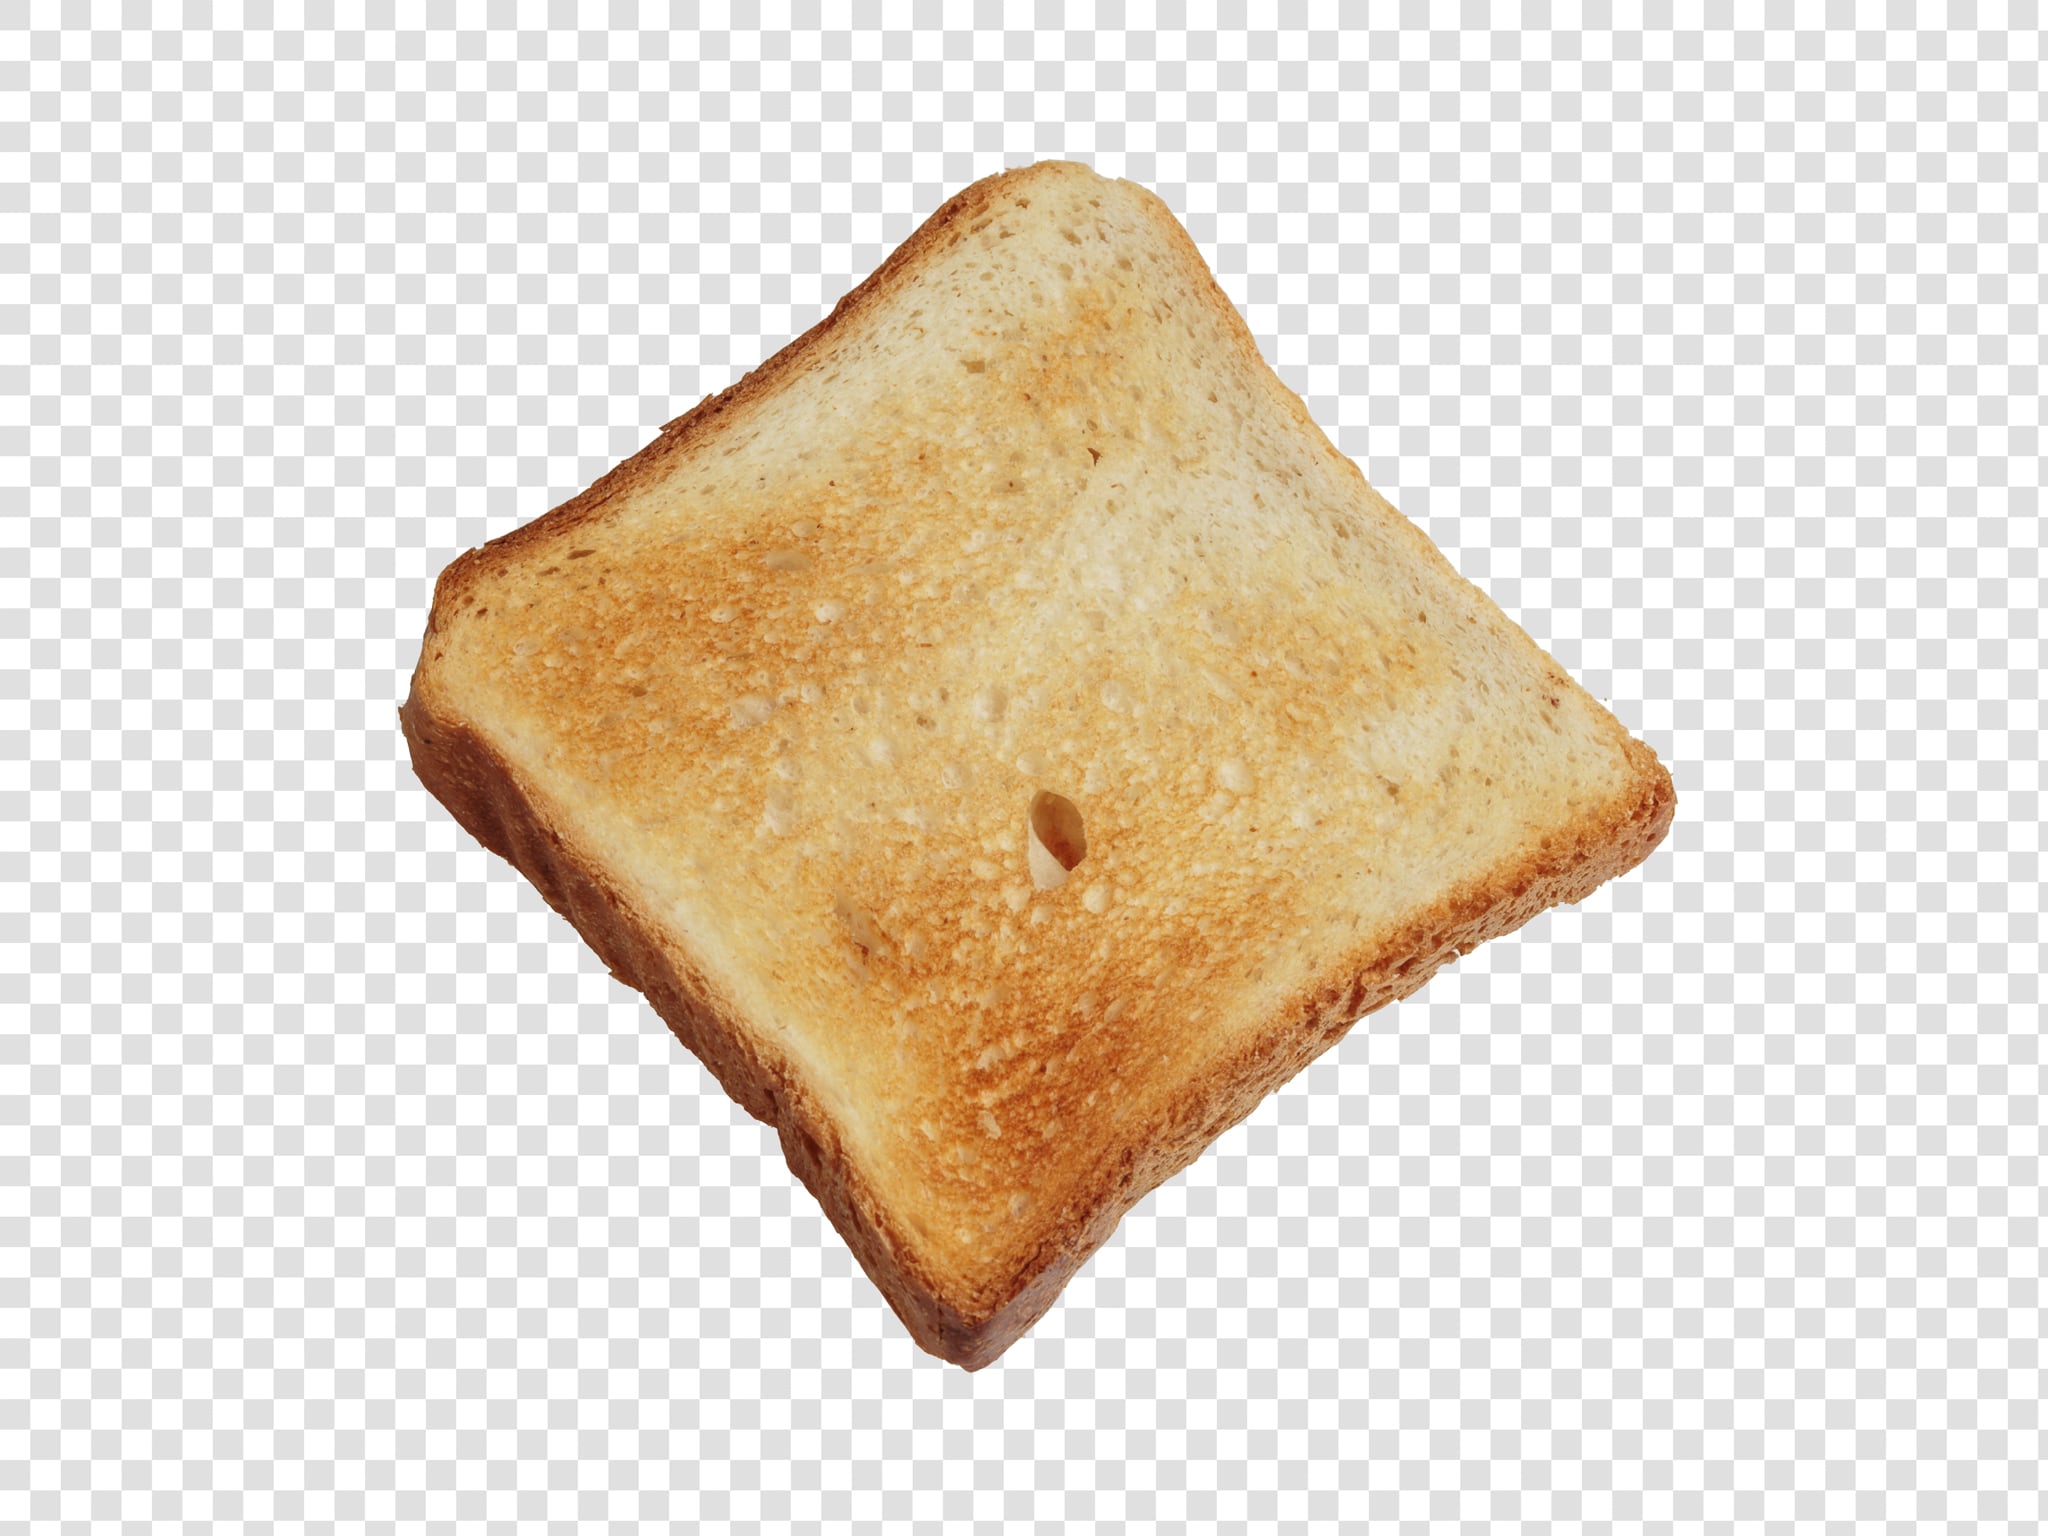 Bread PSD isolated image